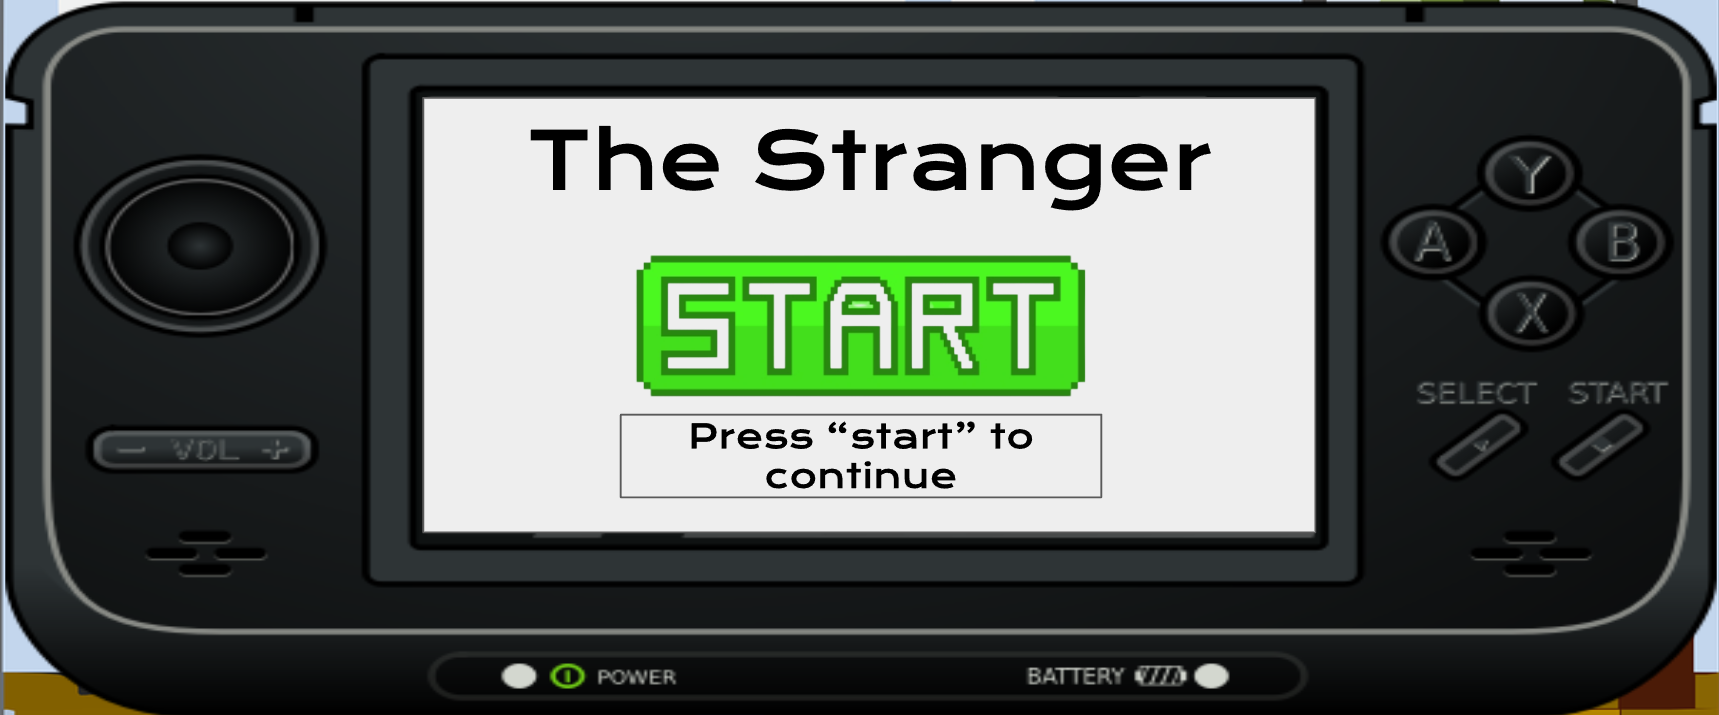 The Stranger An interactive story about online grooming